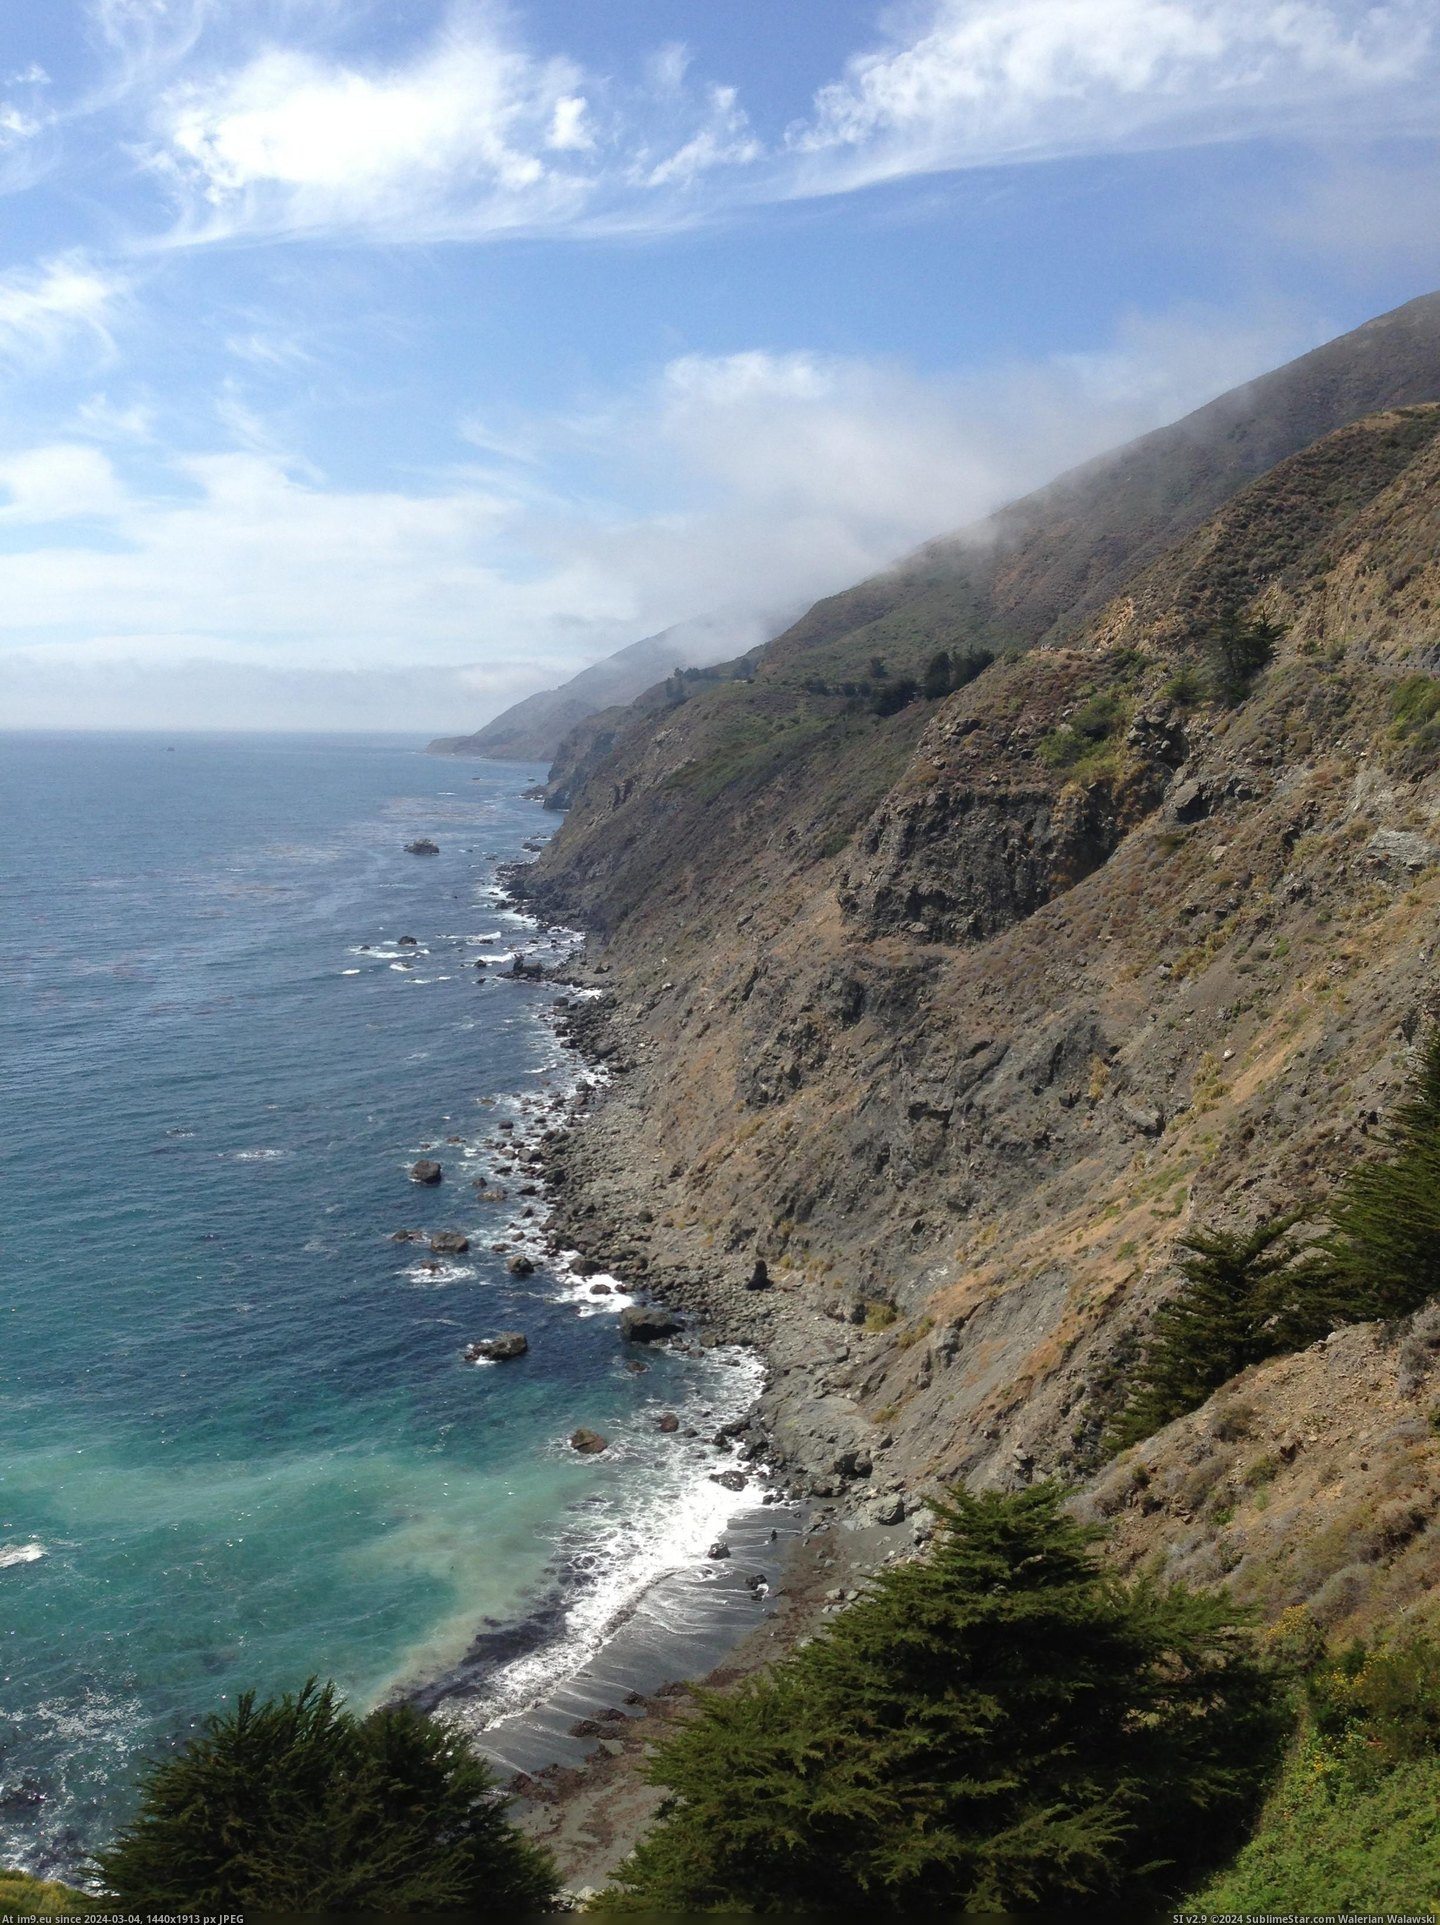 #Shot #Iphone #Californian #Coast #Highway [Earthporn] The Californian coast as seen from Highway 1. Shot with an iPhone 5 [2448 x 3264] Pic. (Изображение из альбом My r/EARTHPORN favs))